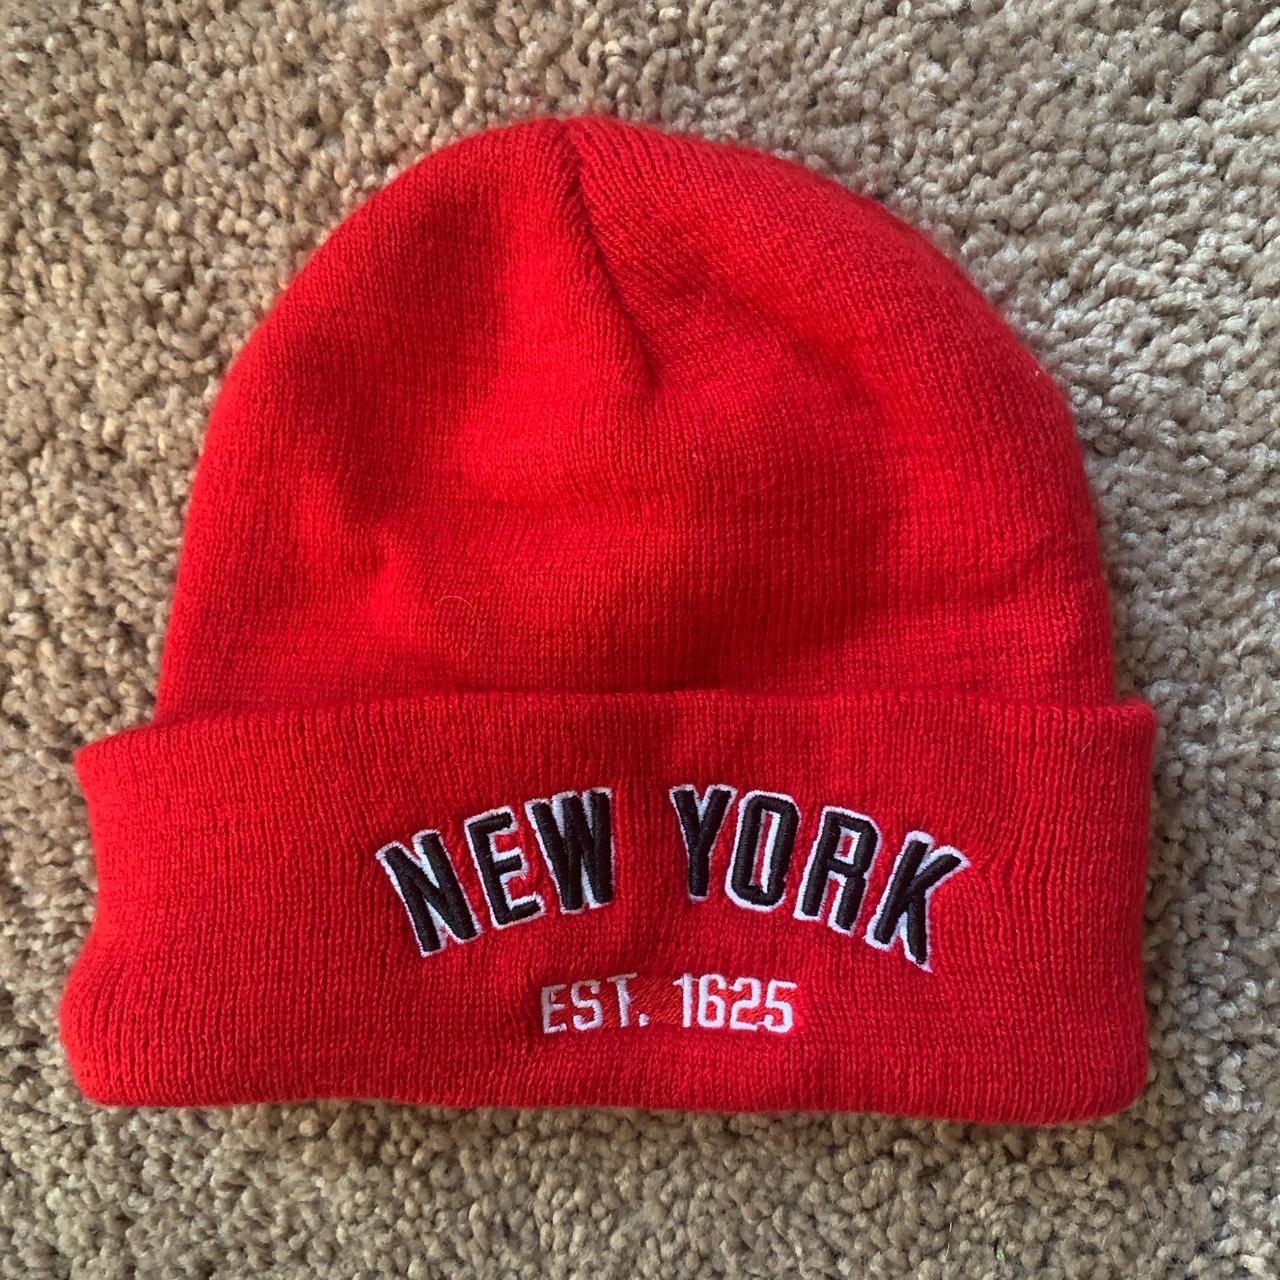 New York beanie red worn once FREE SHIPPING #red... - Depop